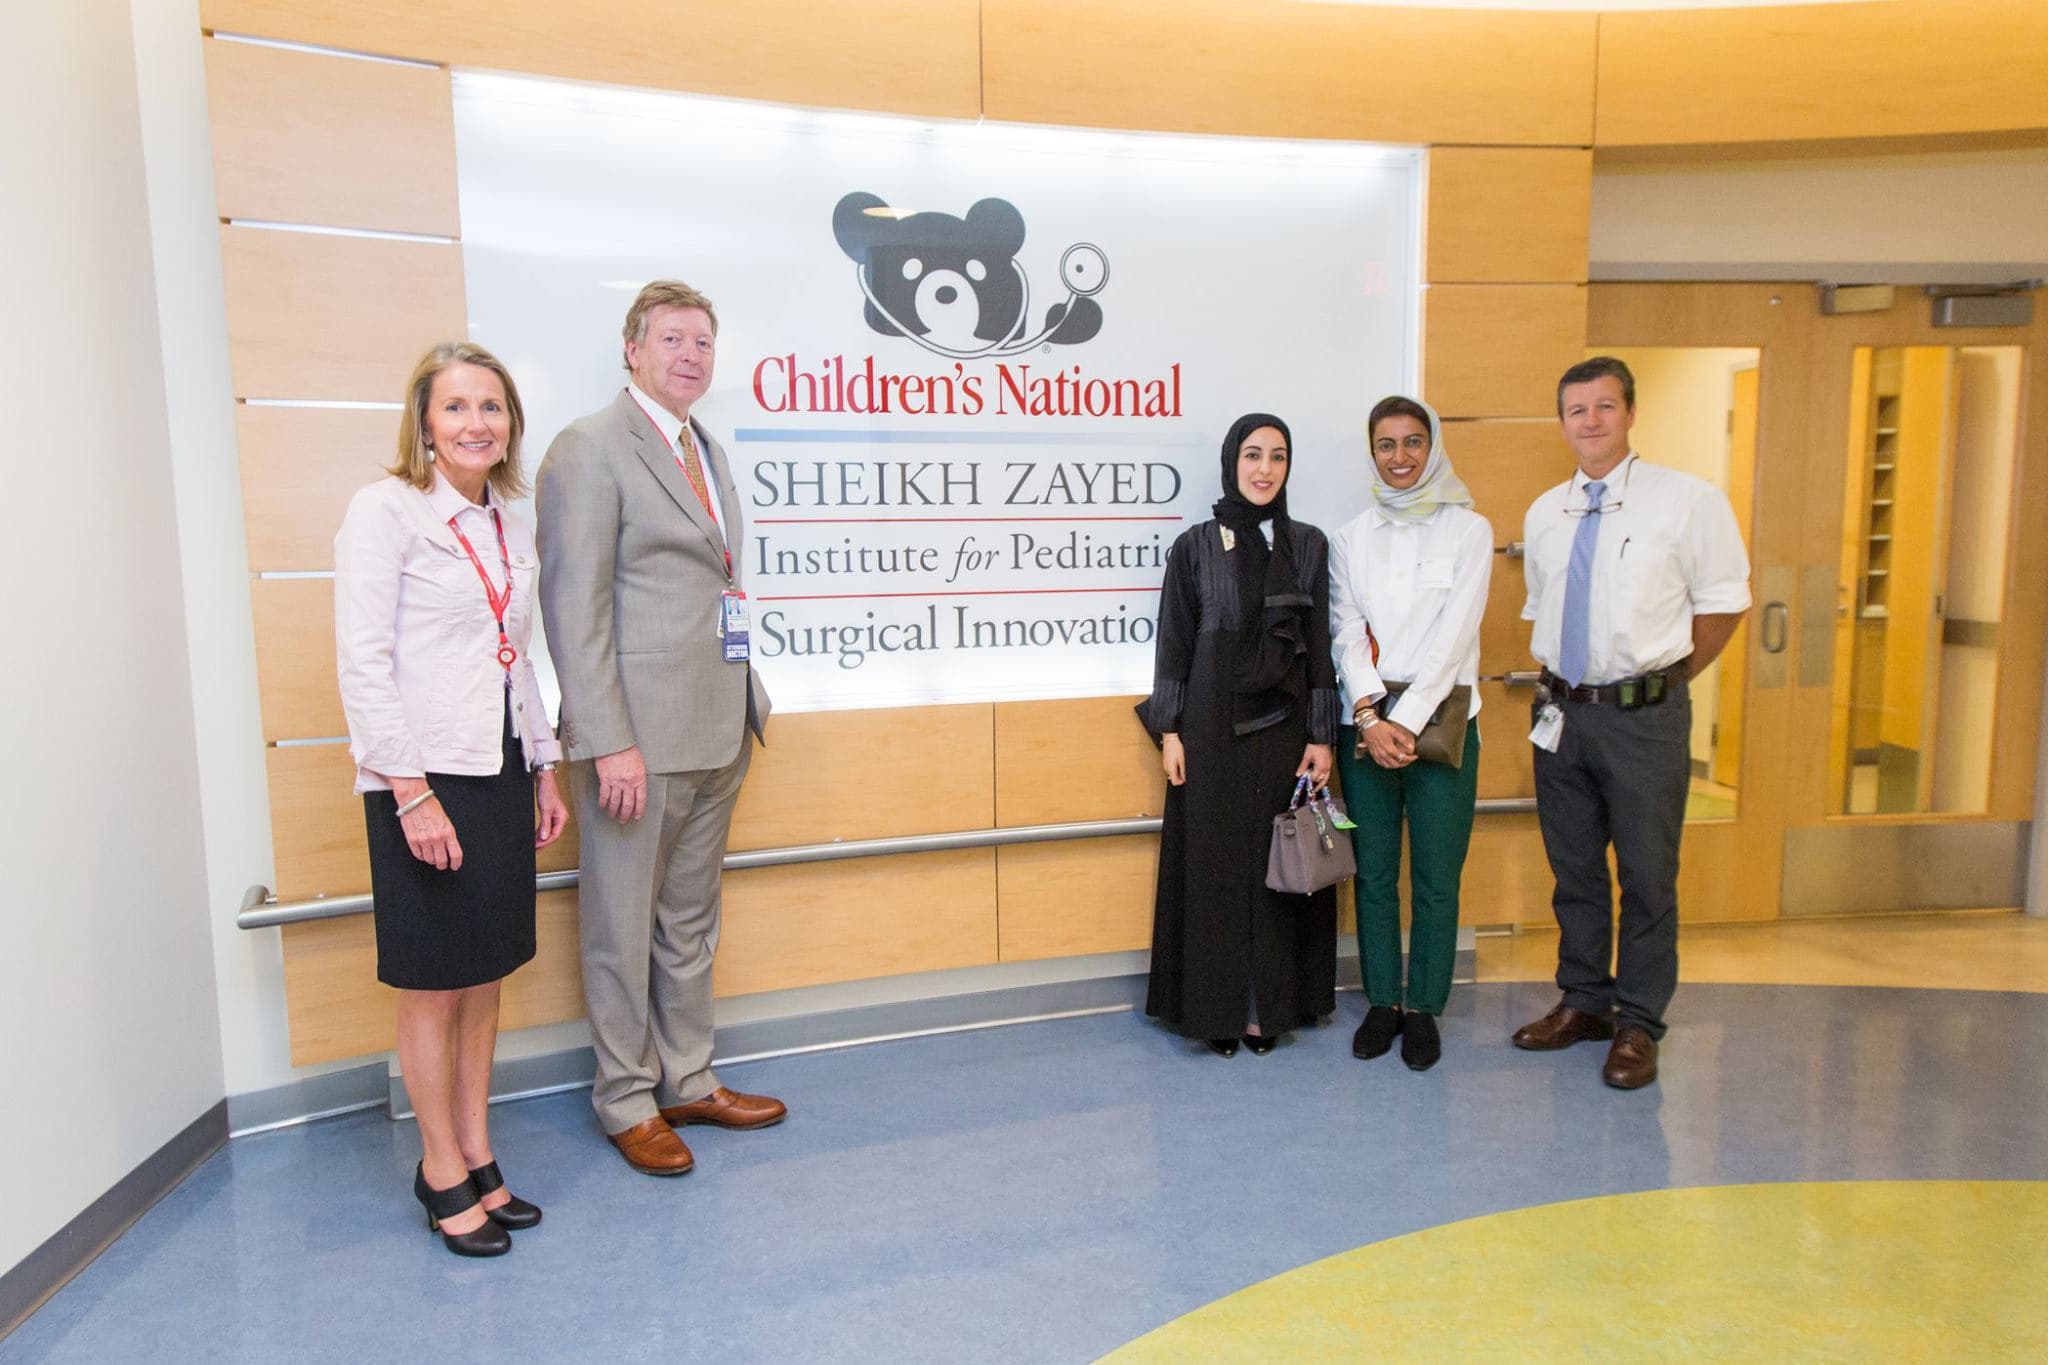 Honored to welcome Their Excellencies; Minister of State for Federal National Council Affairs, Noura Al Kaabi and Minister of State for Youth Affairs, Shamma Al Mazrui to Washington, DC. Their first stop was a tour of the Sheikh Zayed Institute for Pediatric Innovation at Children’s National Medical Center, visiting with UAE patients and families, meeting Emirati doctors in residency and gaining a deeper understanding of how the close working partnership with Children’s National and the United Arab Emirates